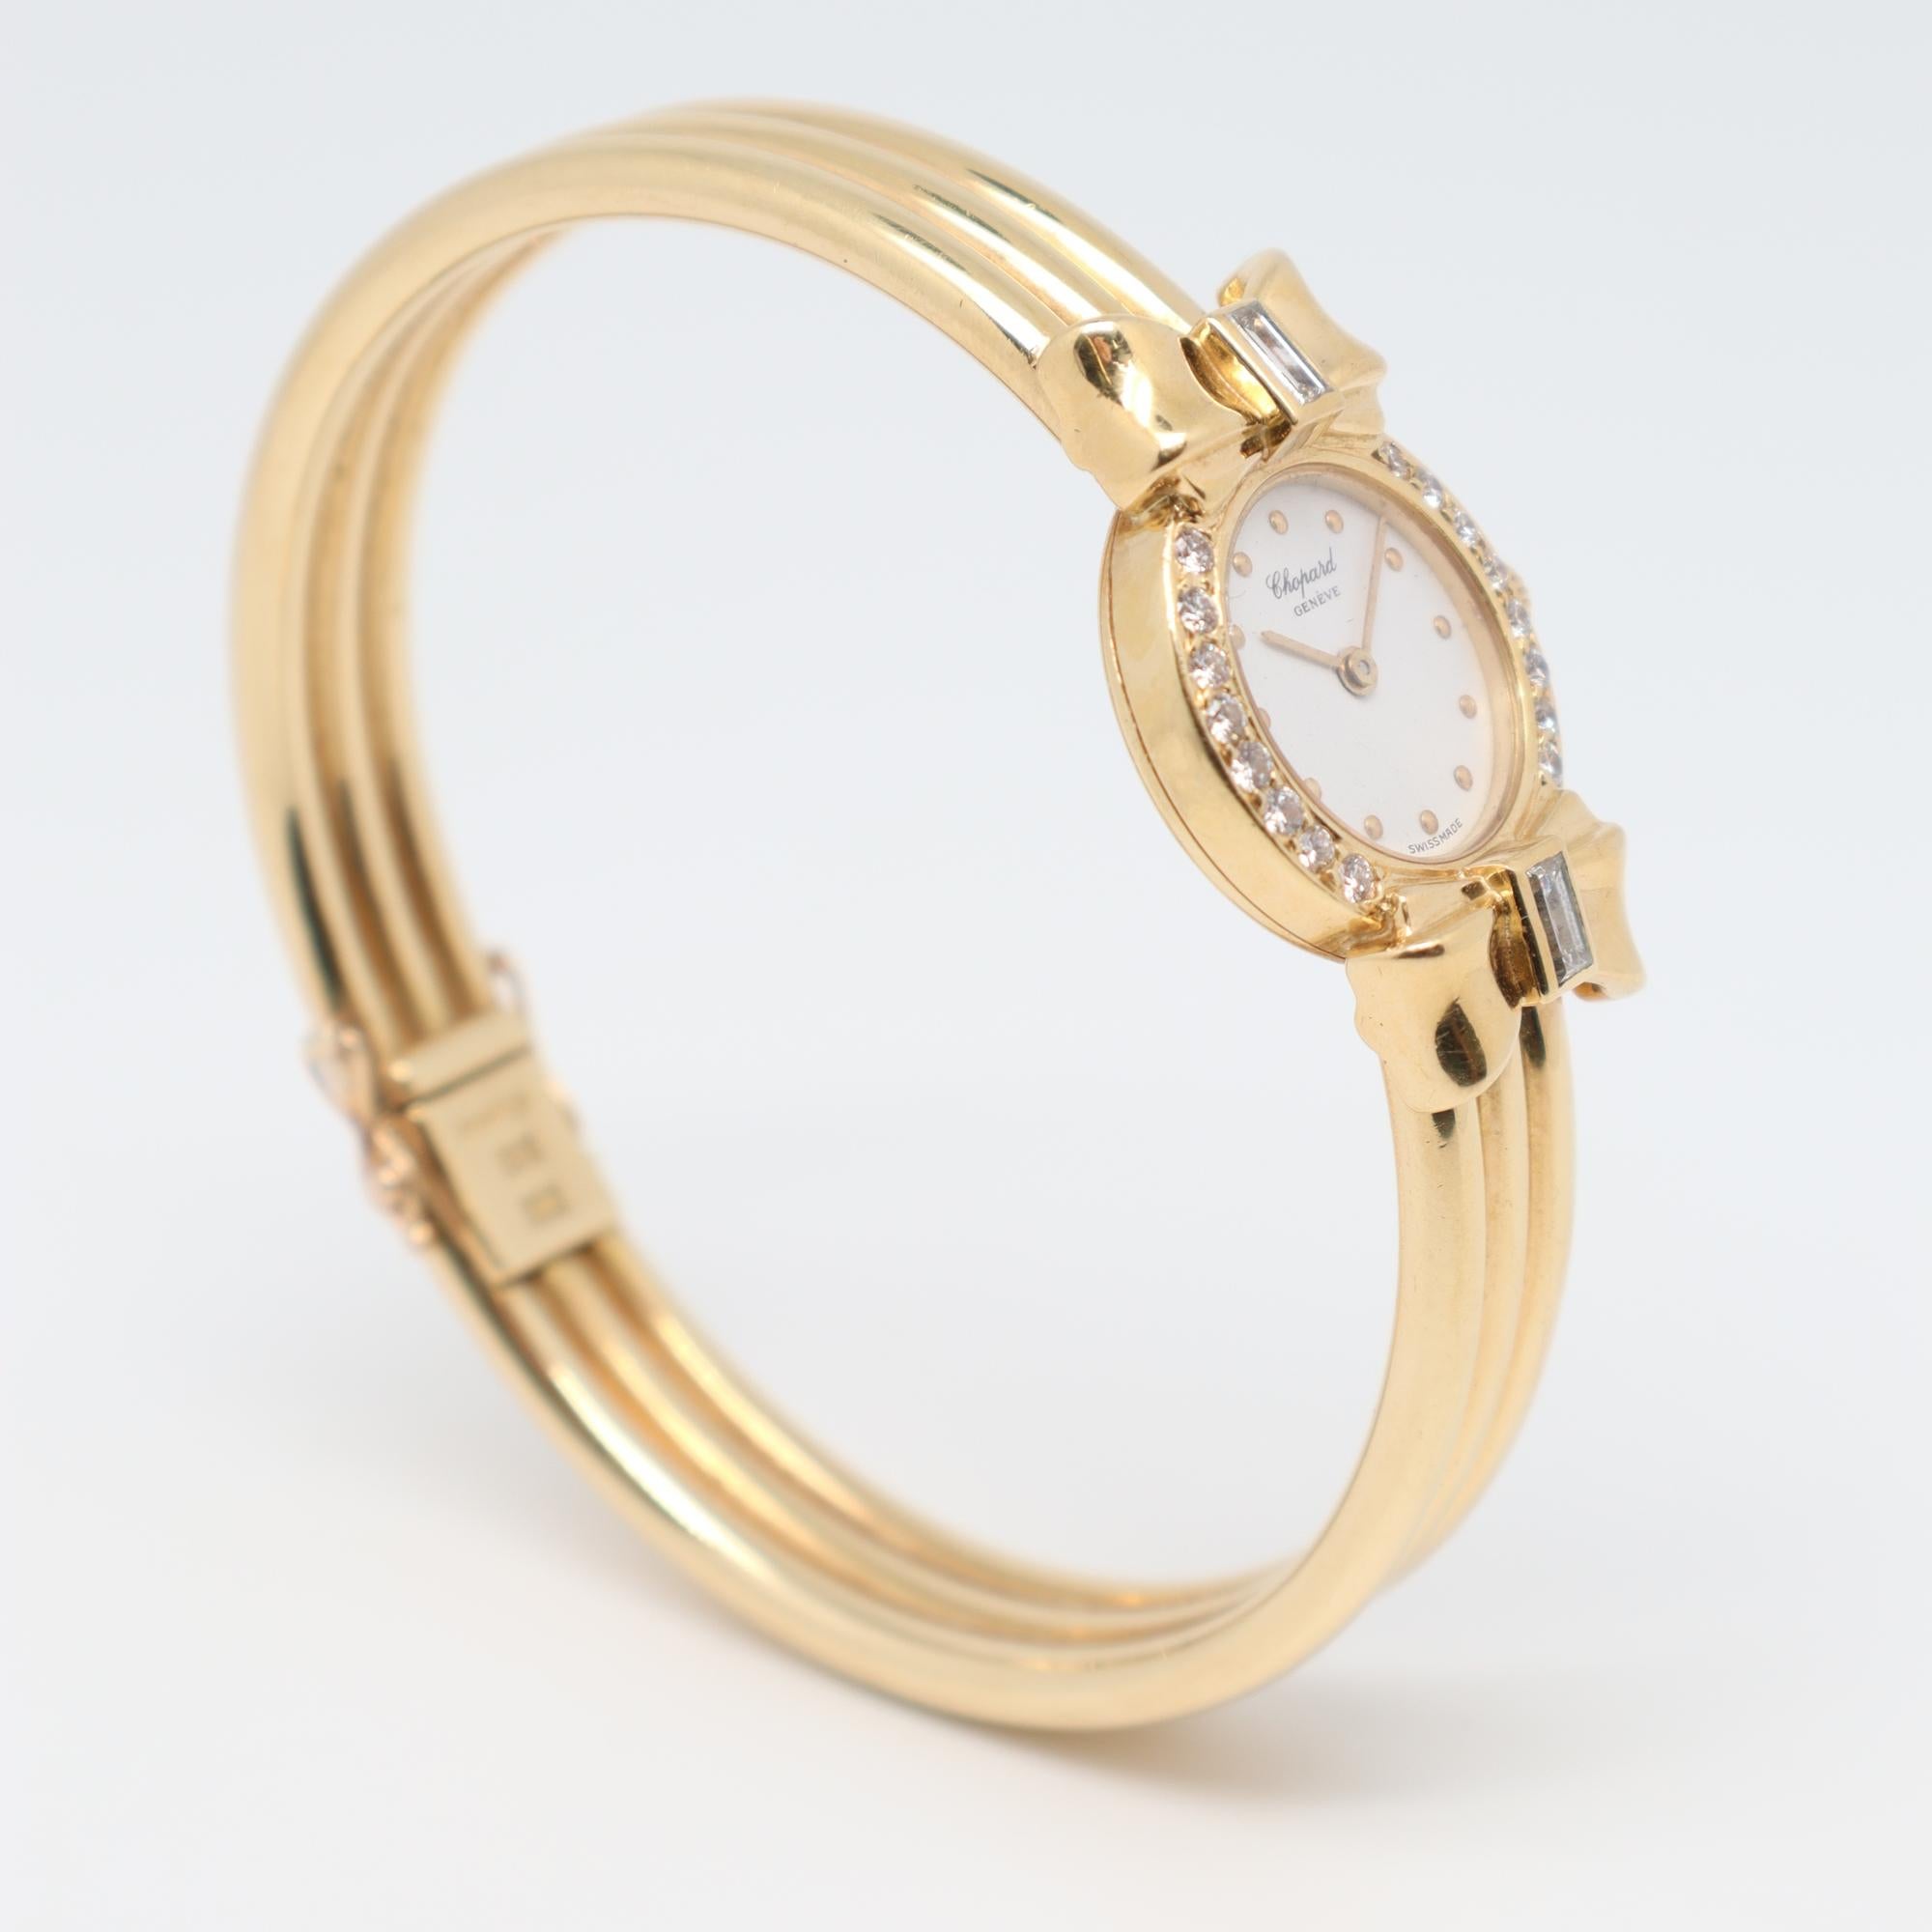 Chopard 18 Karat Yellow Gold Diamond 0.58 Carat Quartz Ladies Watch 10/5440 In Excellent Condition For Sale In New York, NY